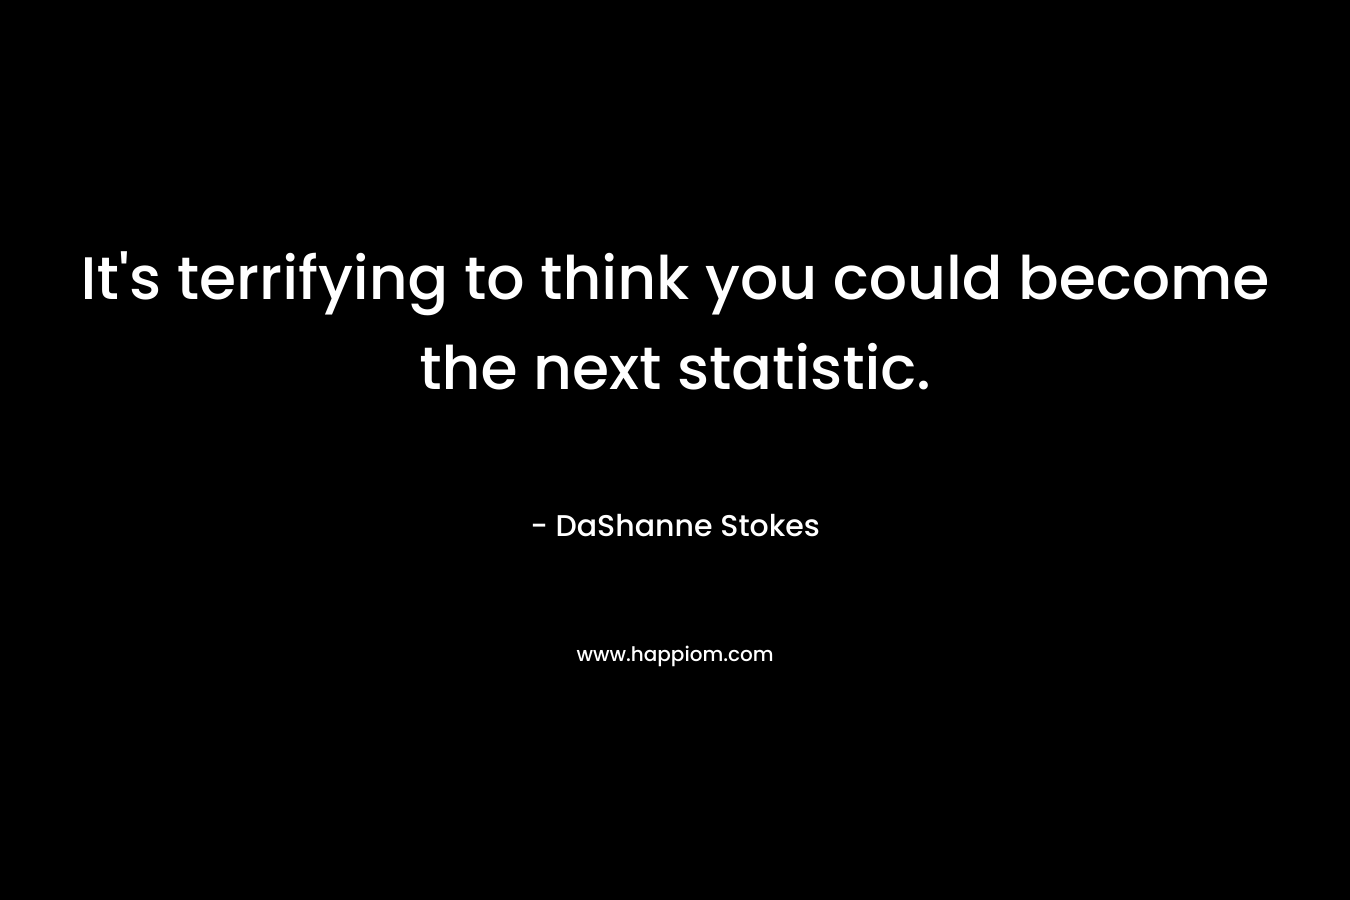 It’s terrifying to think you could become the next statistic. – DaShanne Stokes